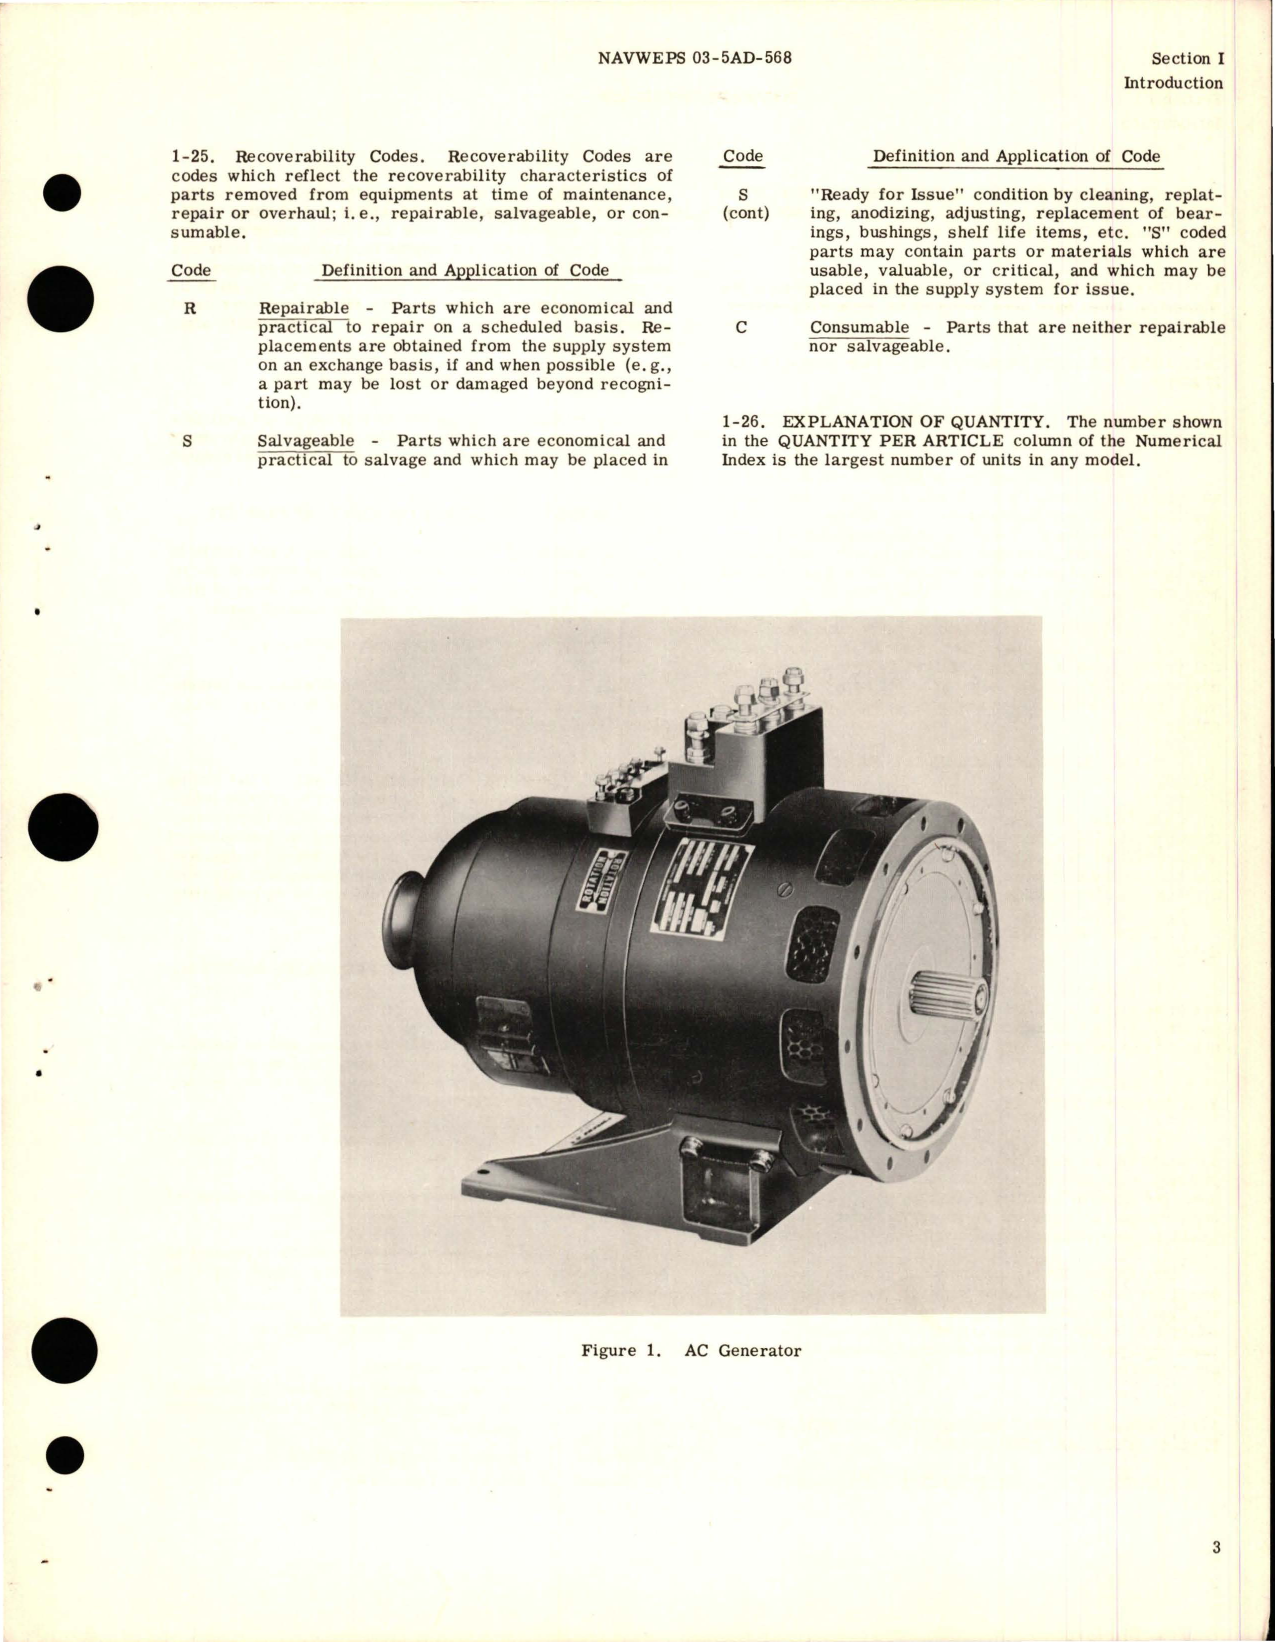 Sample page 5 from AirCorps Library document: Illustrated Parts Breakdown for AC Generator - Models 2CM202, 2CM203, 2CM212, 2CM213, 2CM215